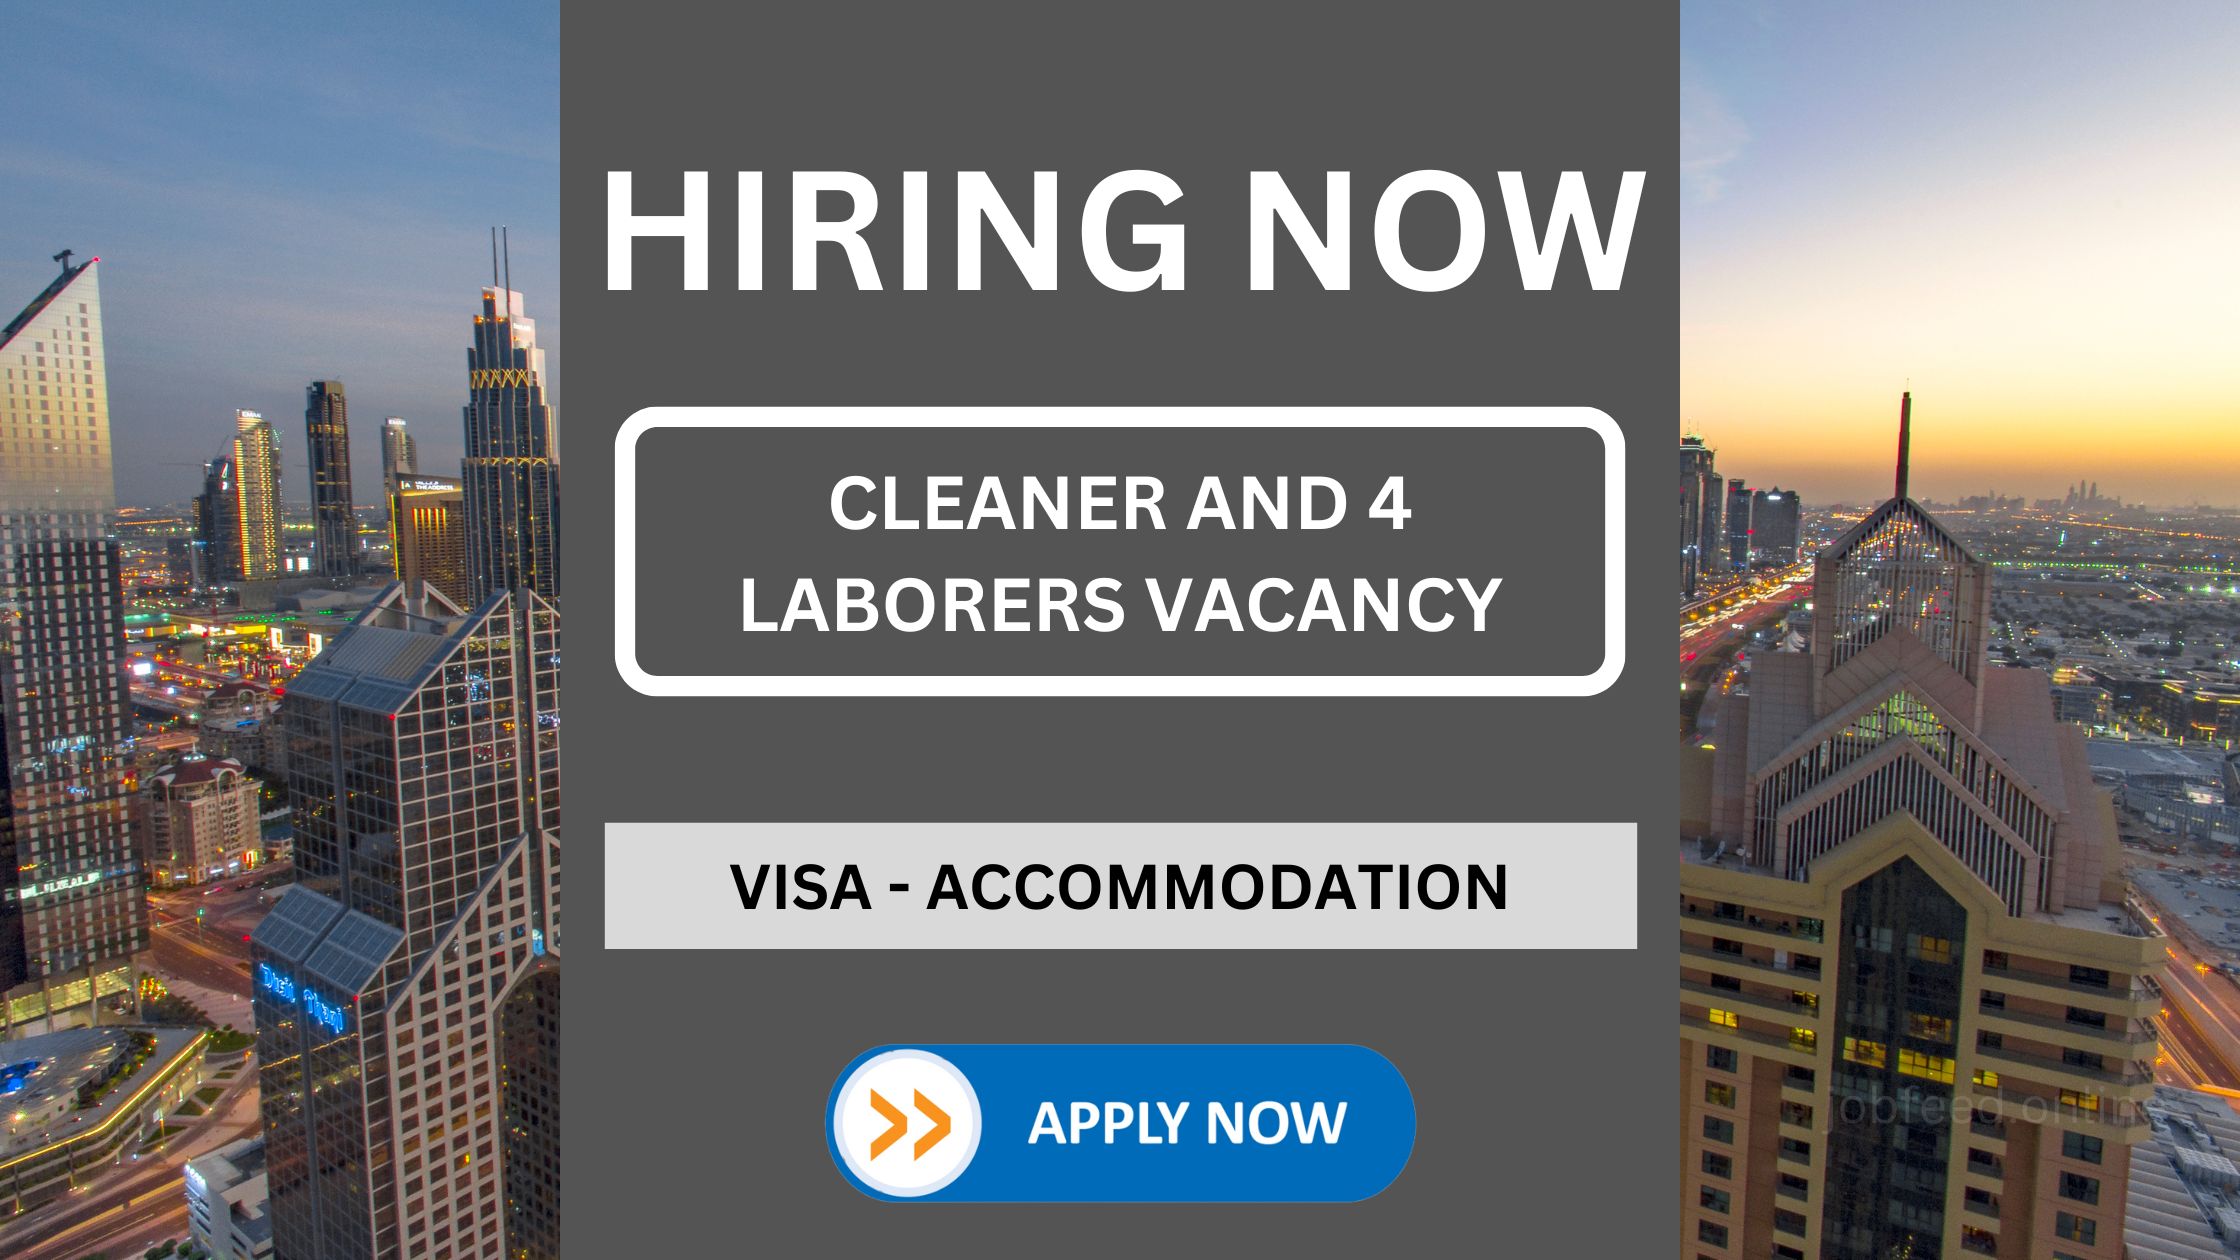 Visa, Accommodation, and Good Salary Provided: Cleaner and 4 Laborers Vacancy